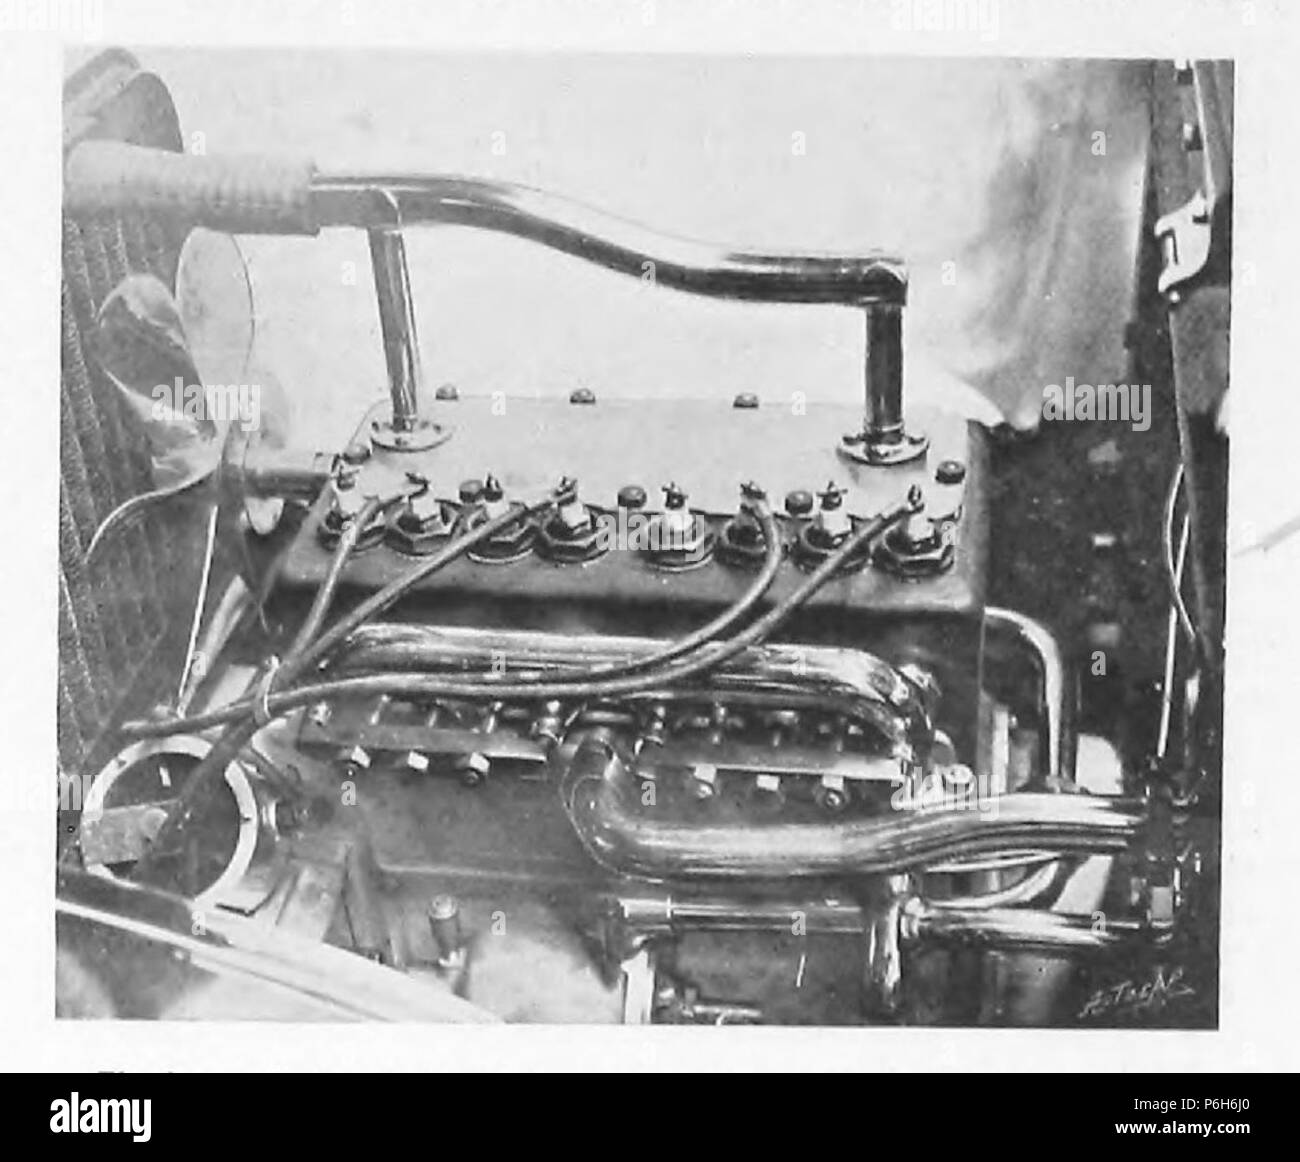 1905 Rover 10-12hp 4-cylinder engine. Stock Photo